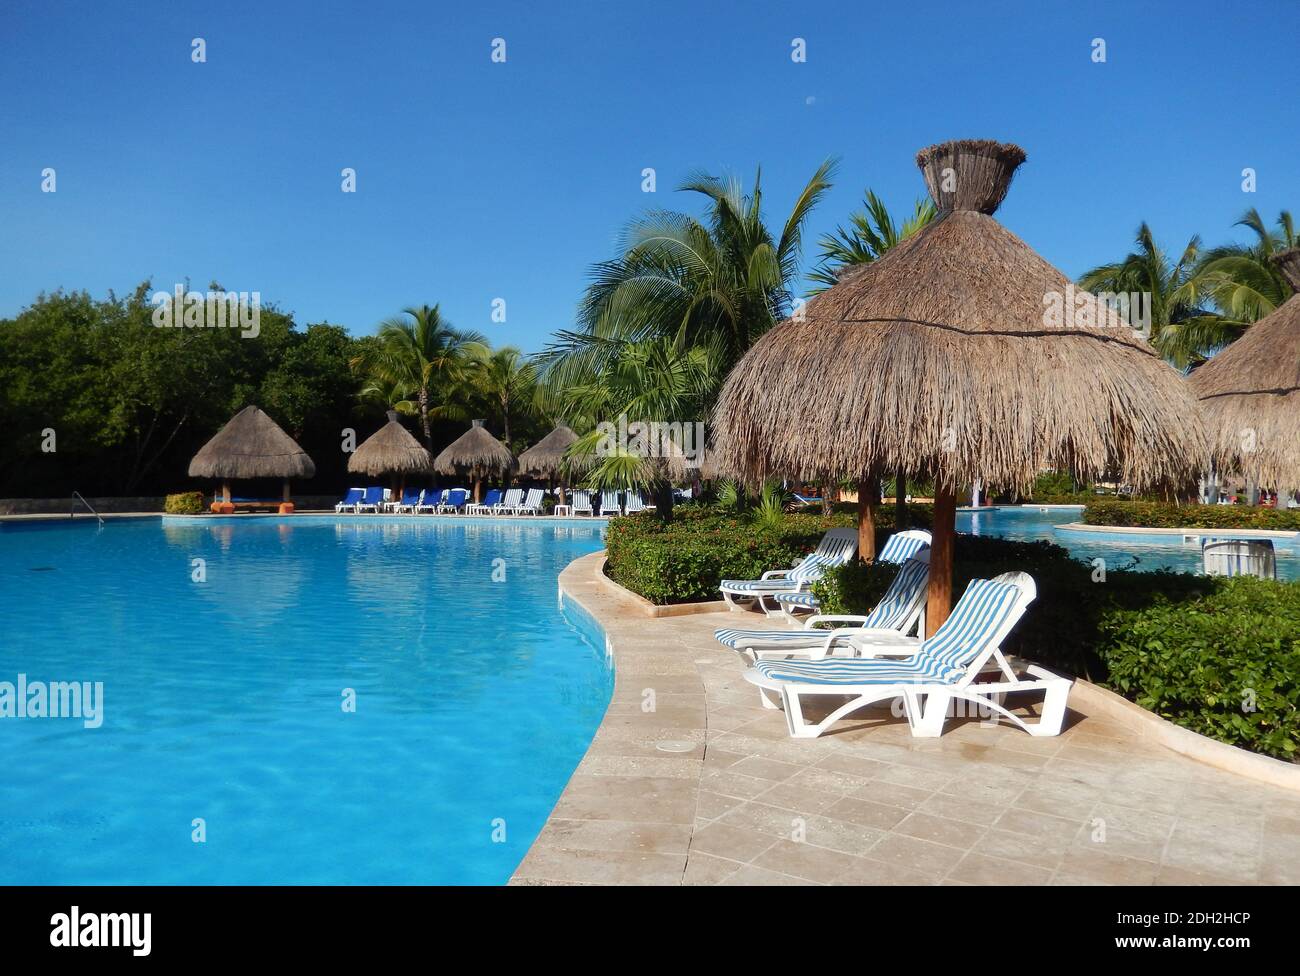 Pool sitting area with straw umbrellas, chaise longue chairs and palm trees landscape, at a Caribbean beach resort on the Riviera Maya, in Cancun, Mex Stock Photo